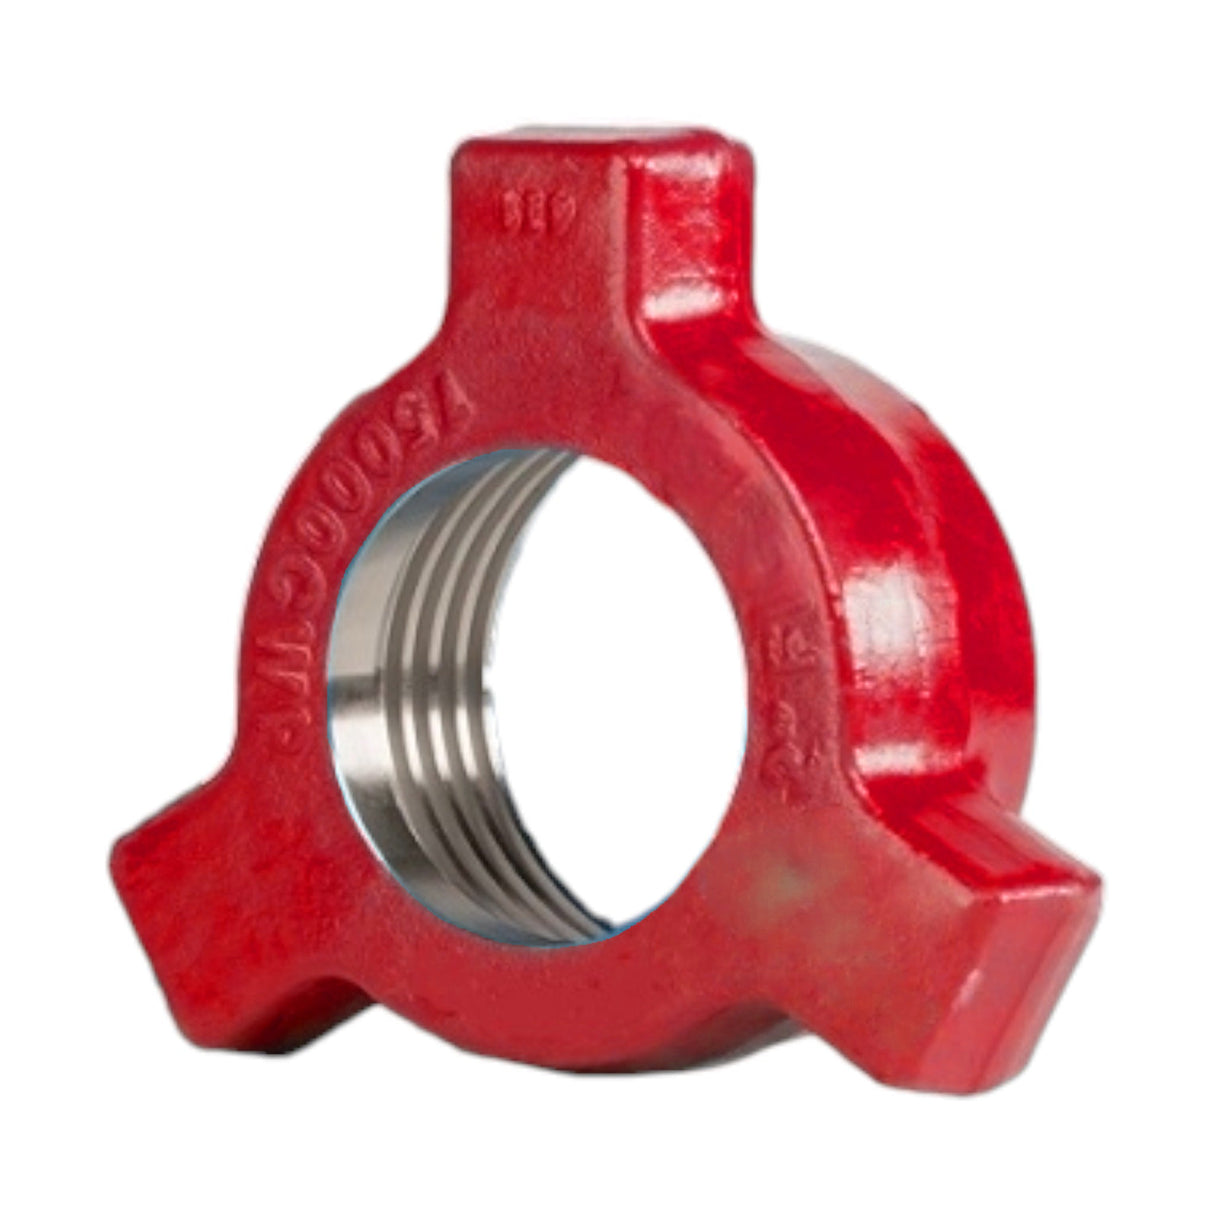 Hammer Union, Wing Nut Only, 2" 1502, 10000 psi, Sour Service, Non Detachable (NNA)